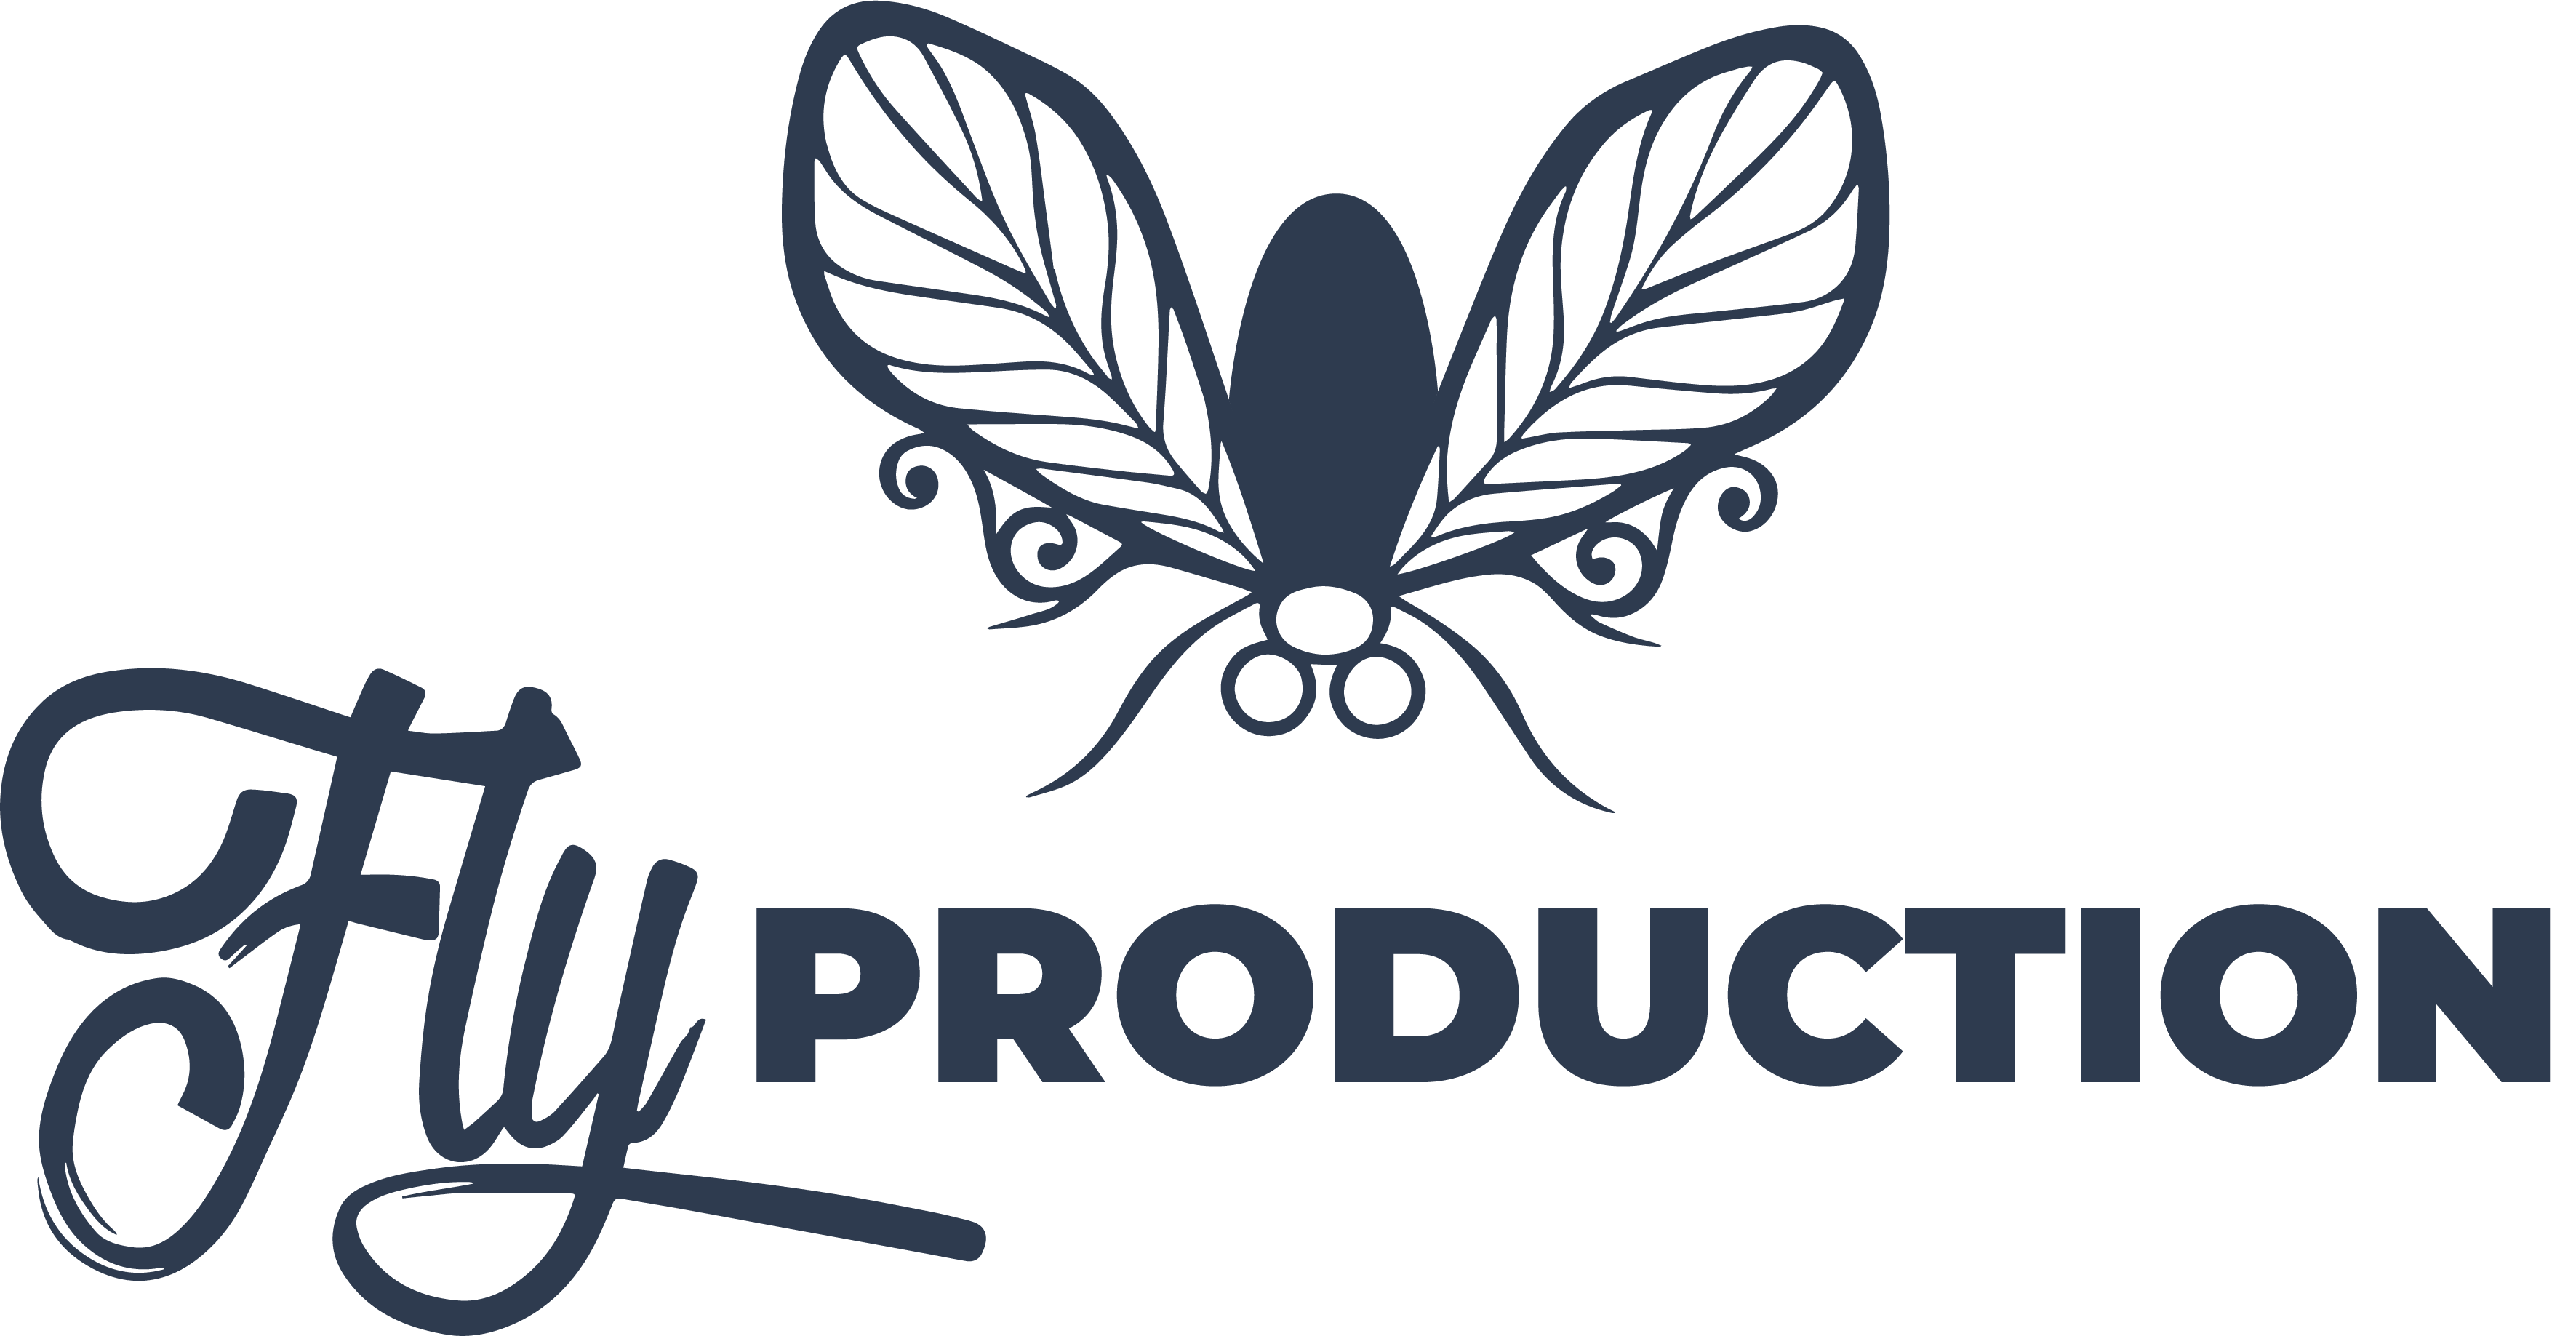 FLY PRODUCTION